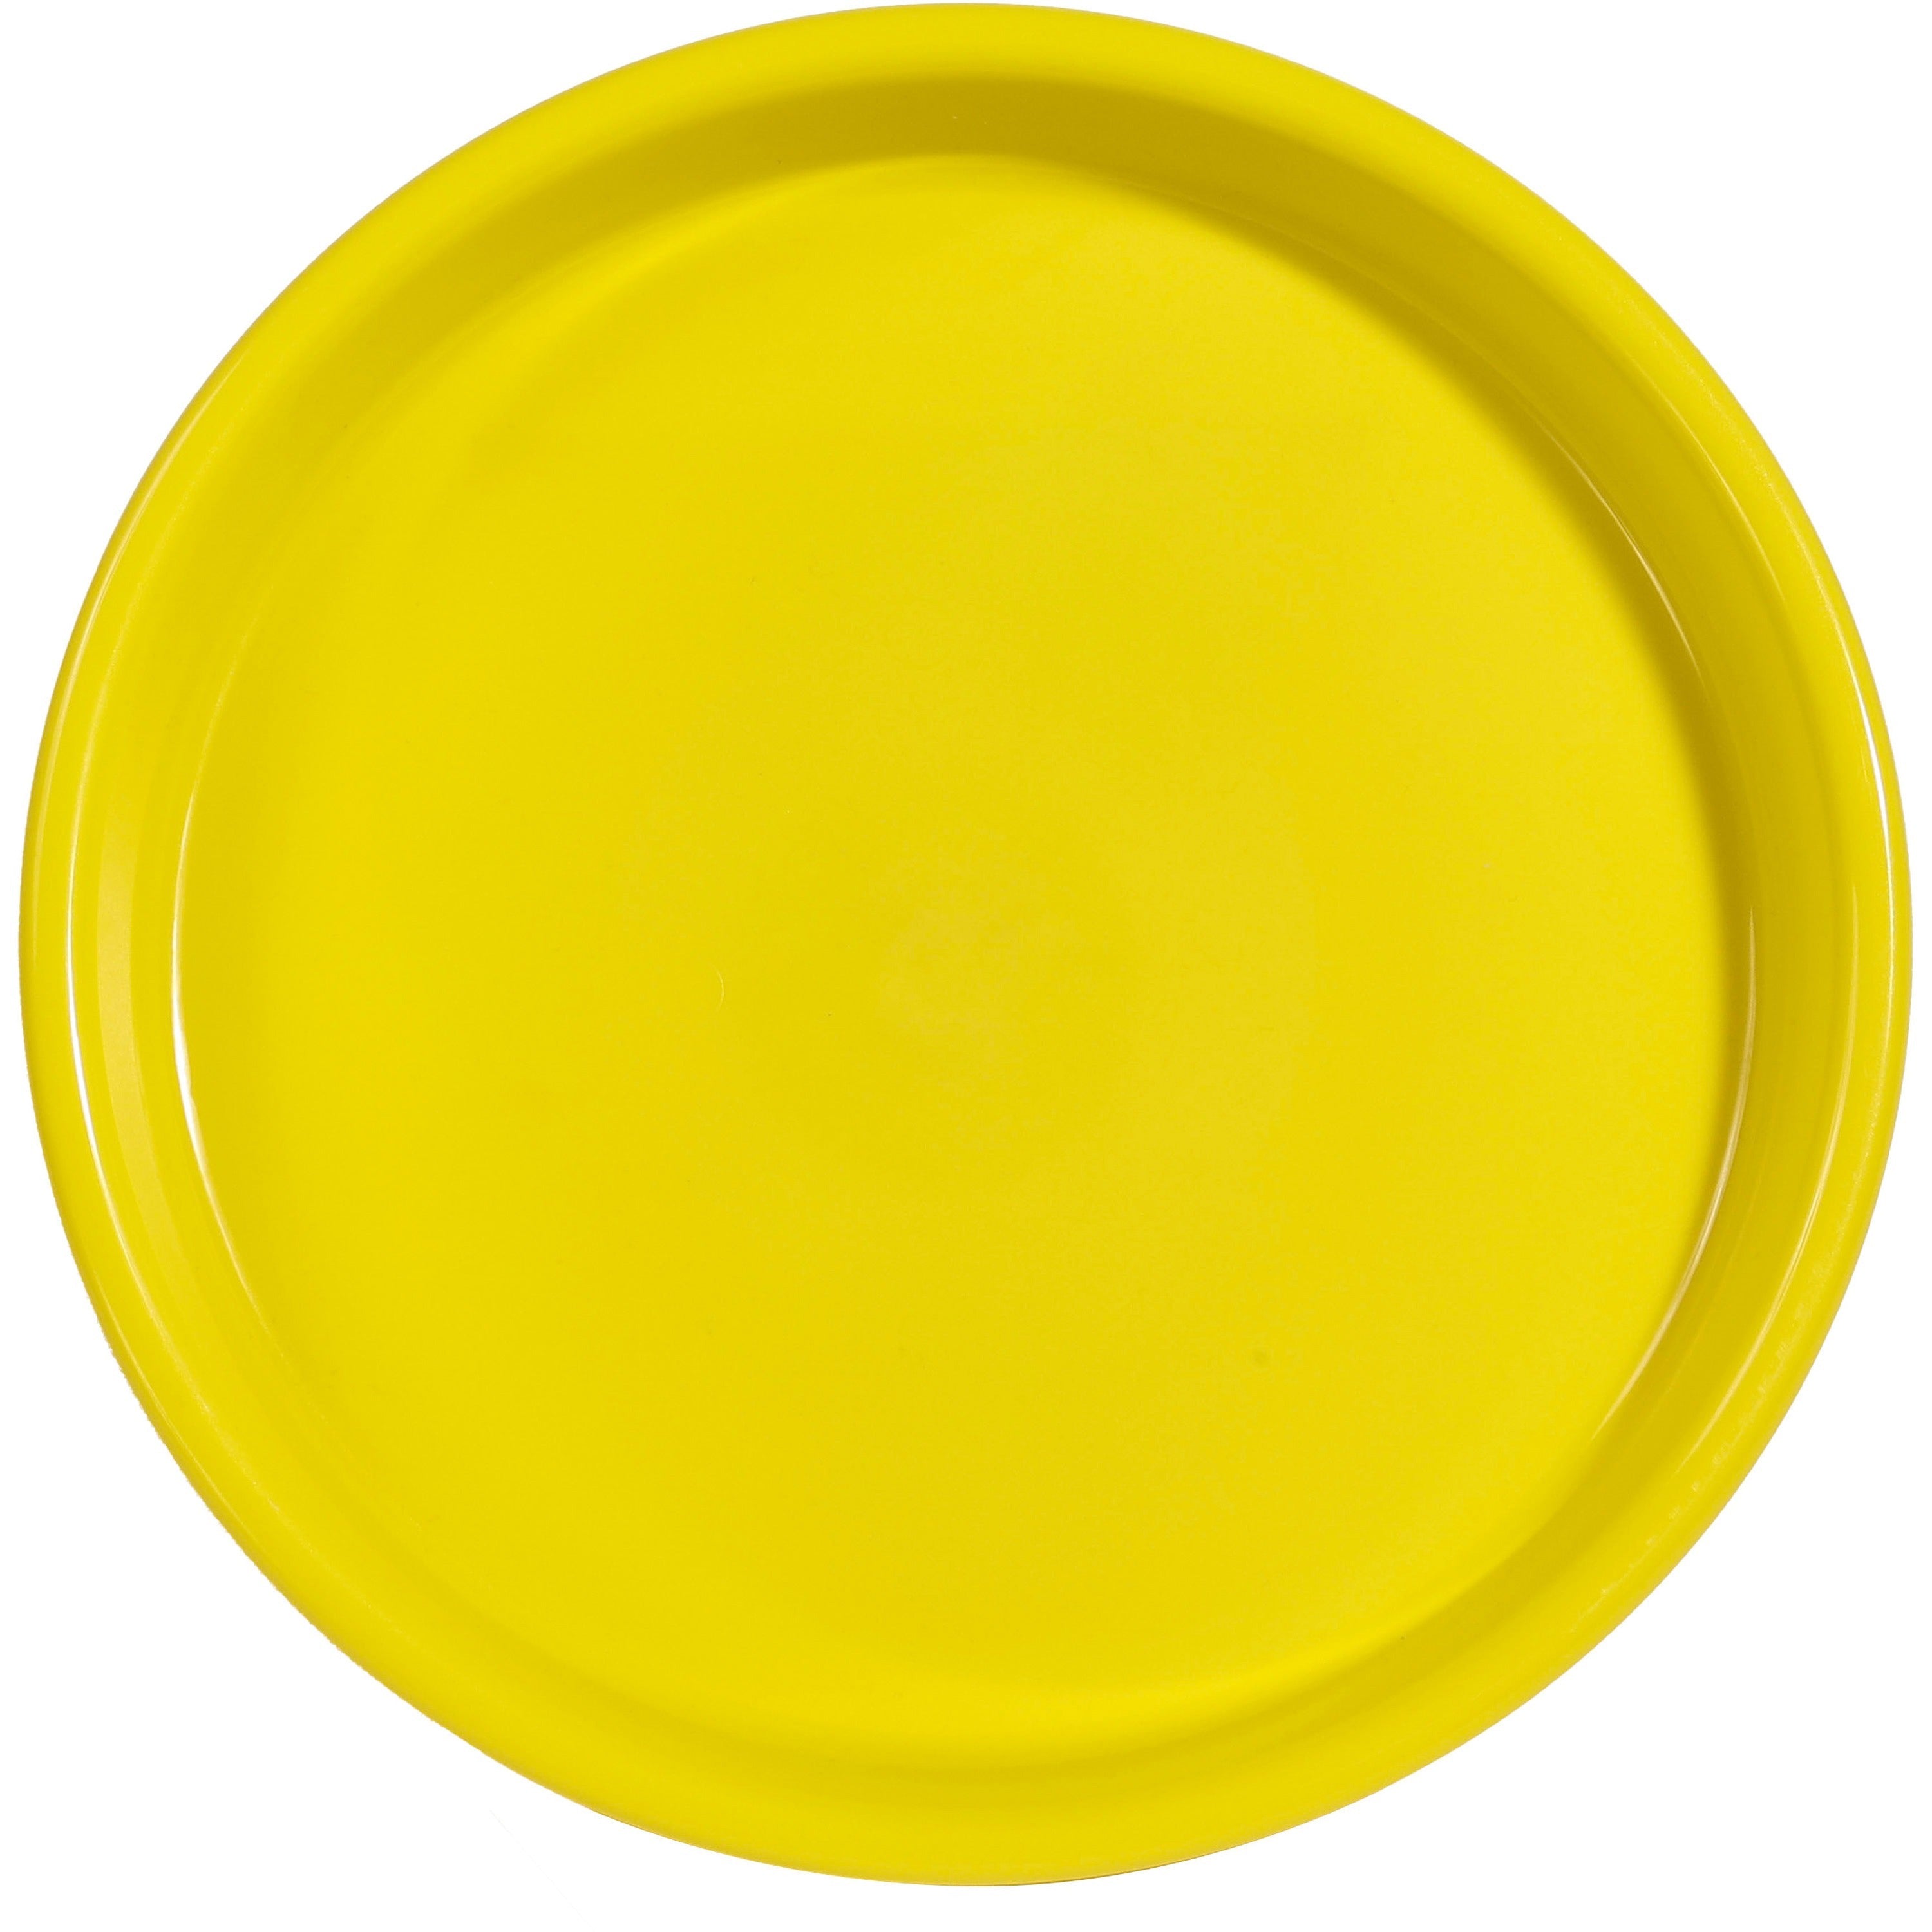 deflecto-kids-antimicrobial-round-craft-tray-accessories-art-craft-161height-x-1307width-x-1307depth-1-each-yellow-polypropylene_def39514yel - 2